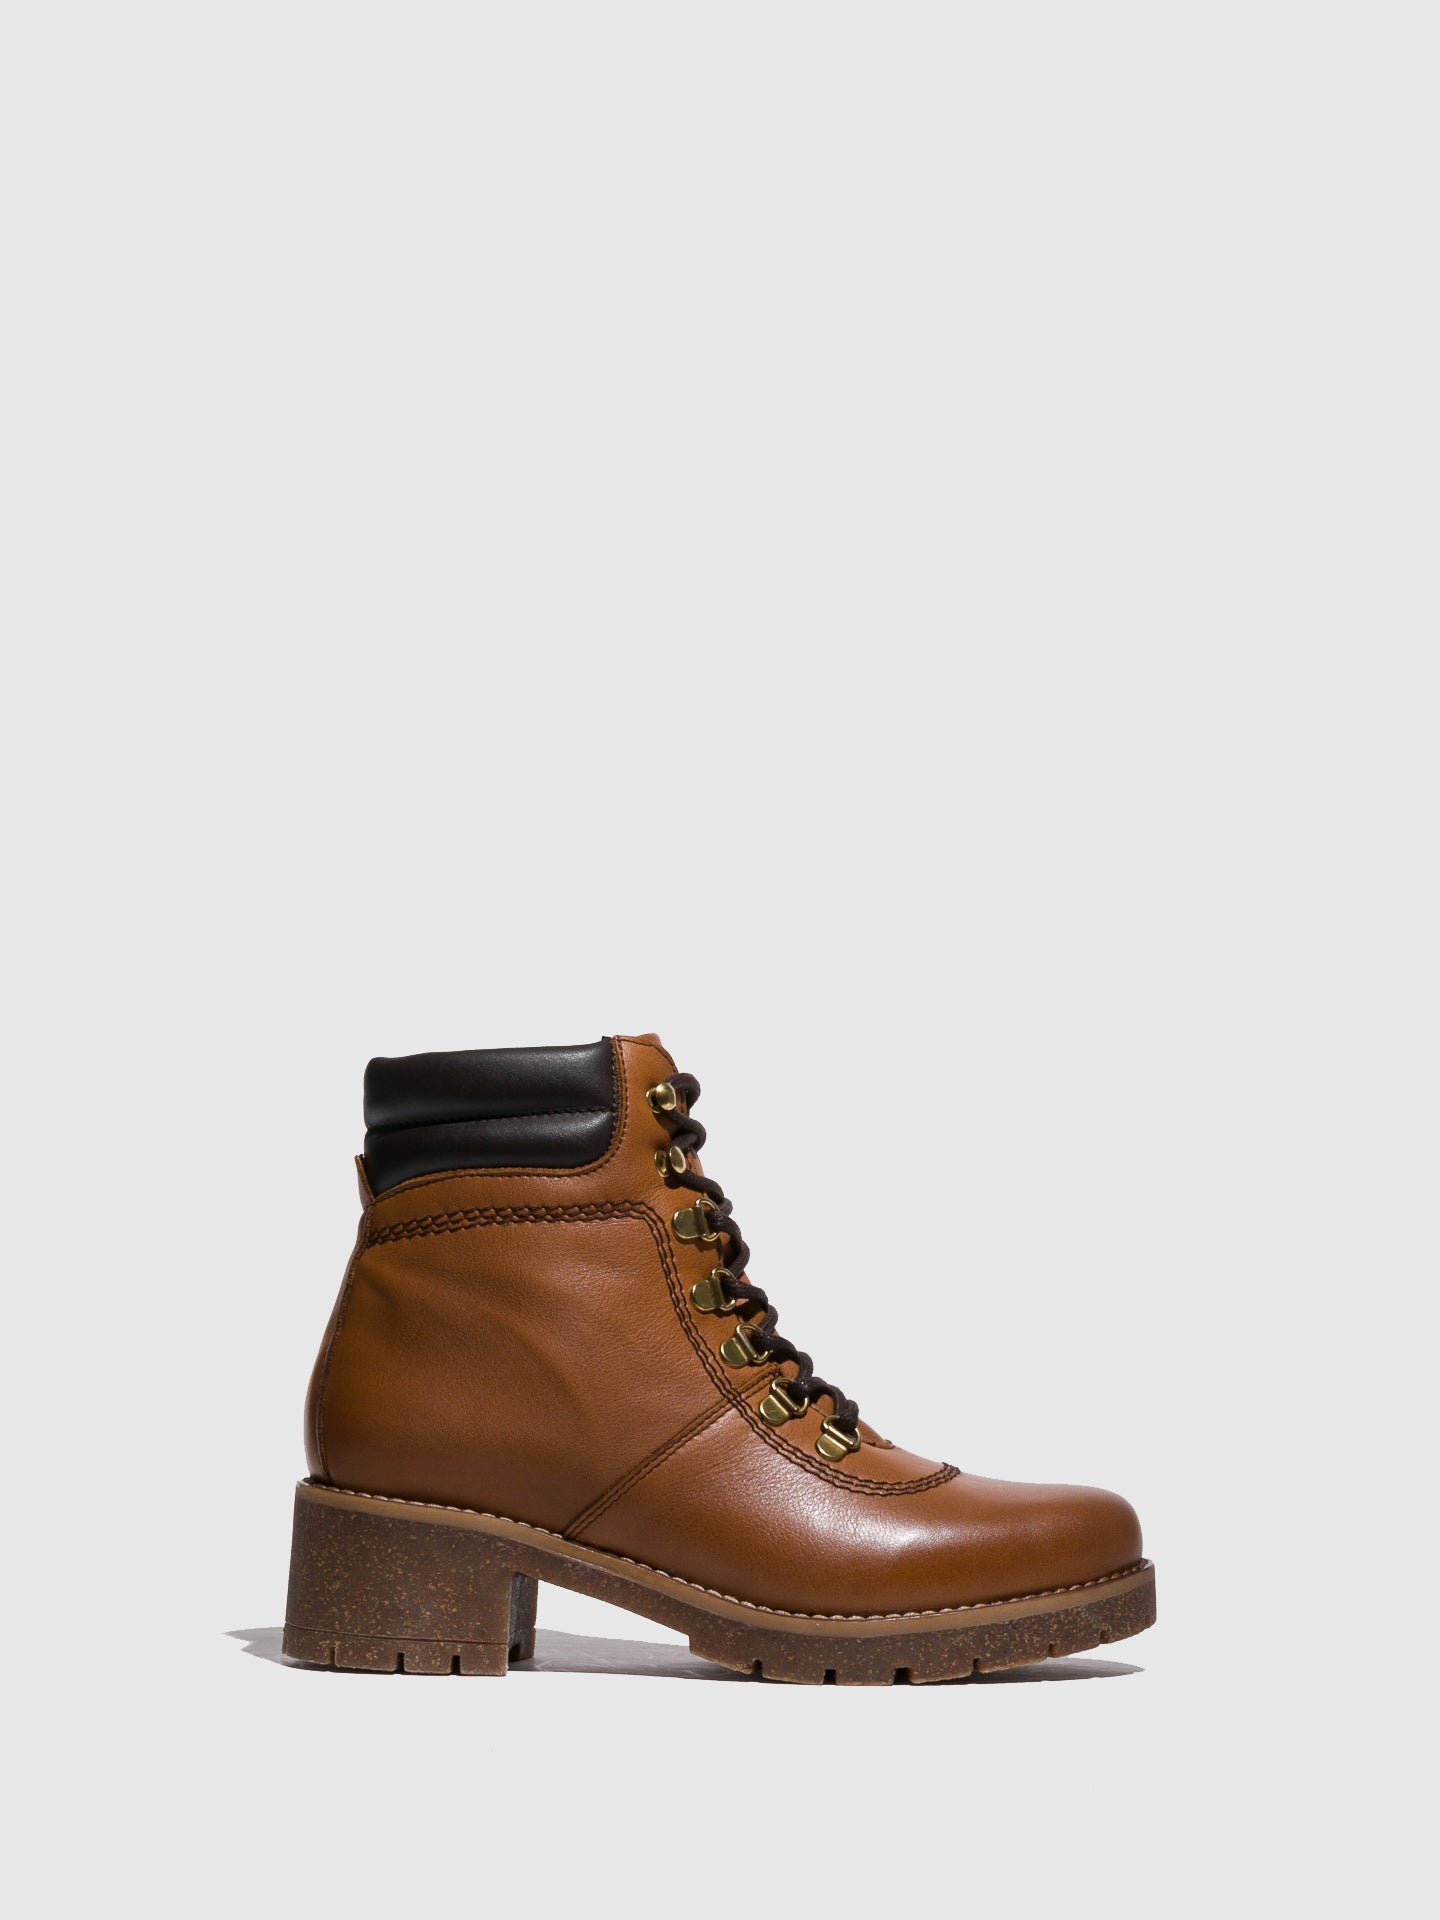 Fungi Camel Lace-up Boots